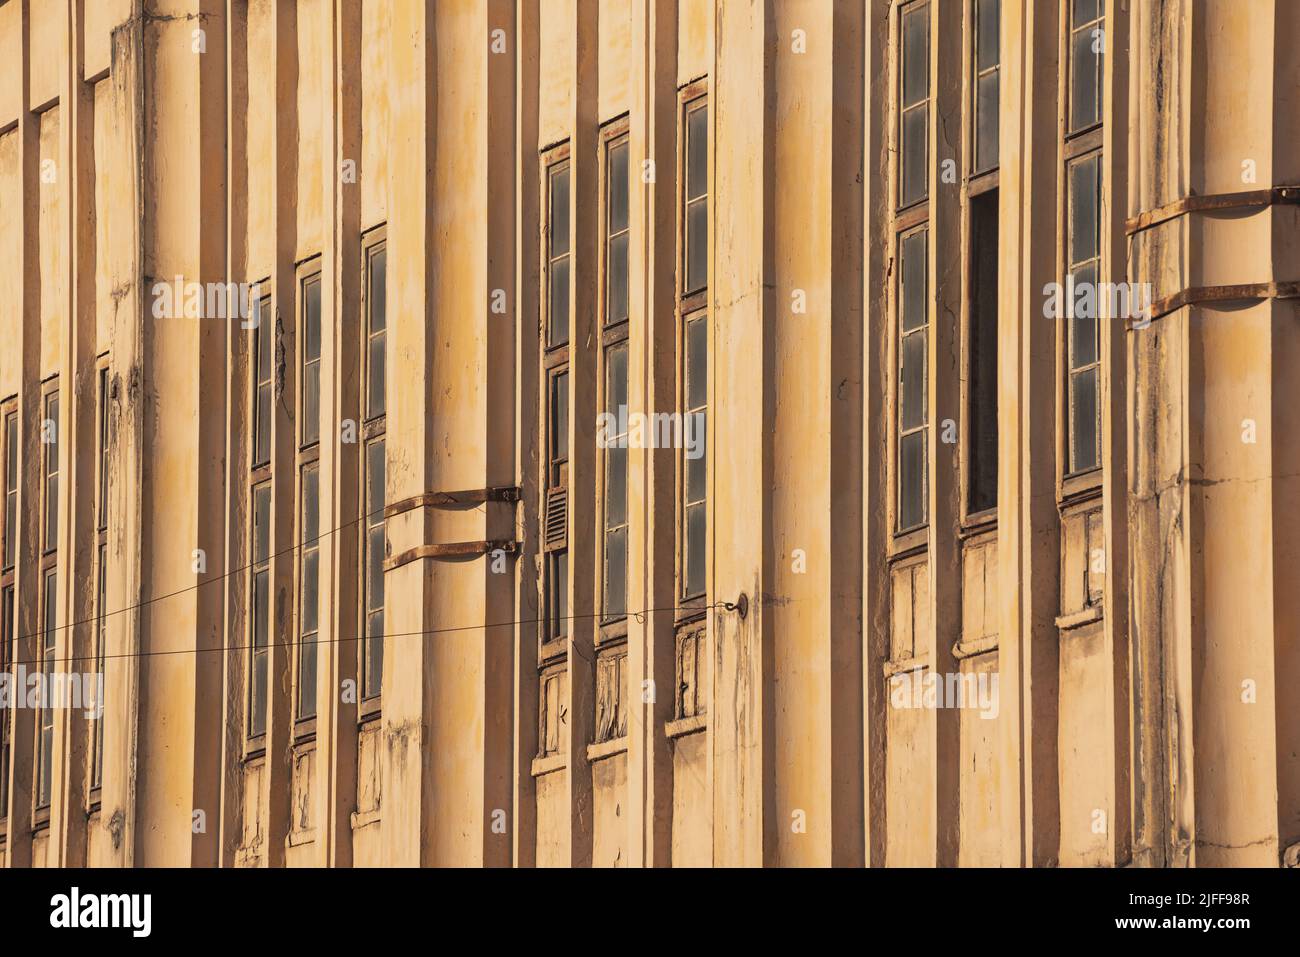 Narrow vertical windows of a century-old factory. Closeup, historic industrial architecture. Vintage background Stock Photo